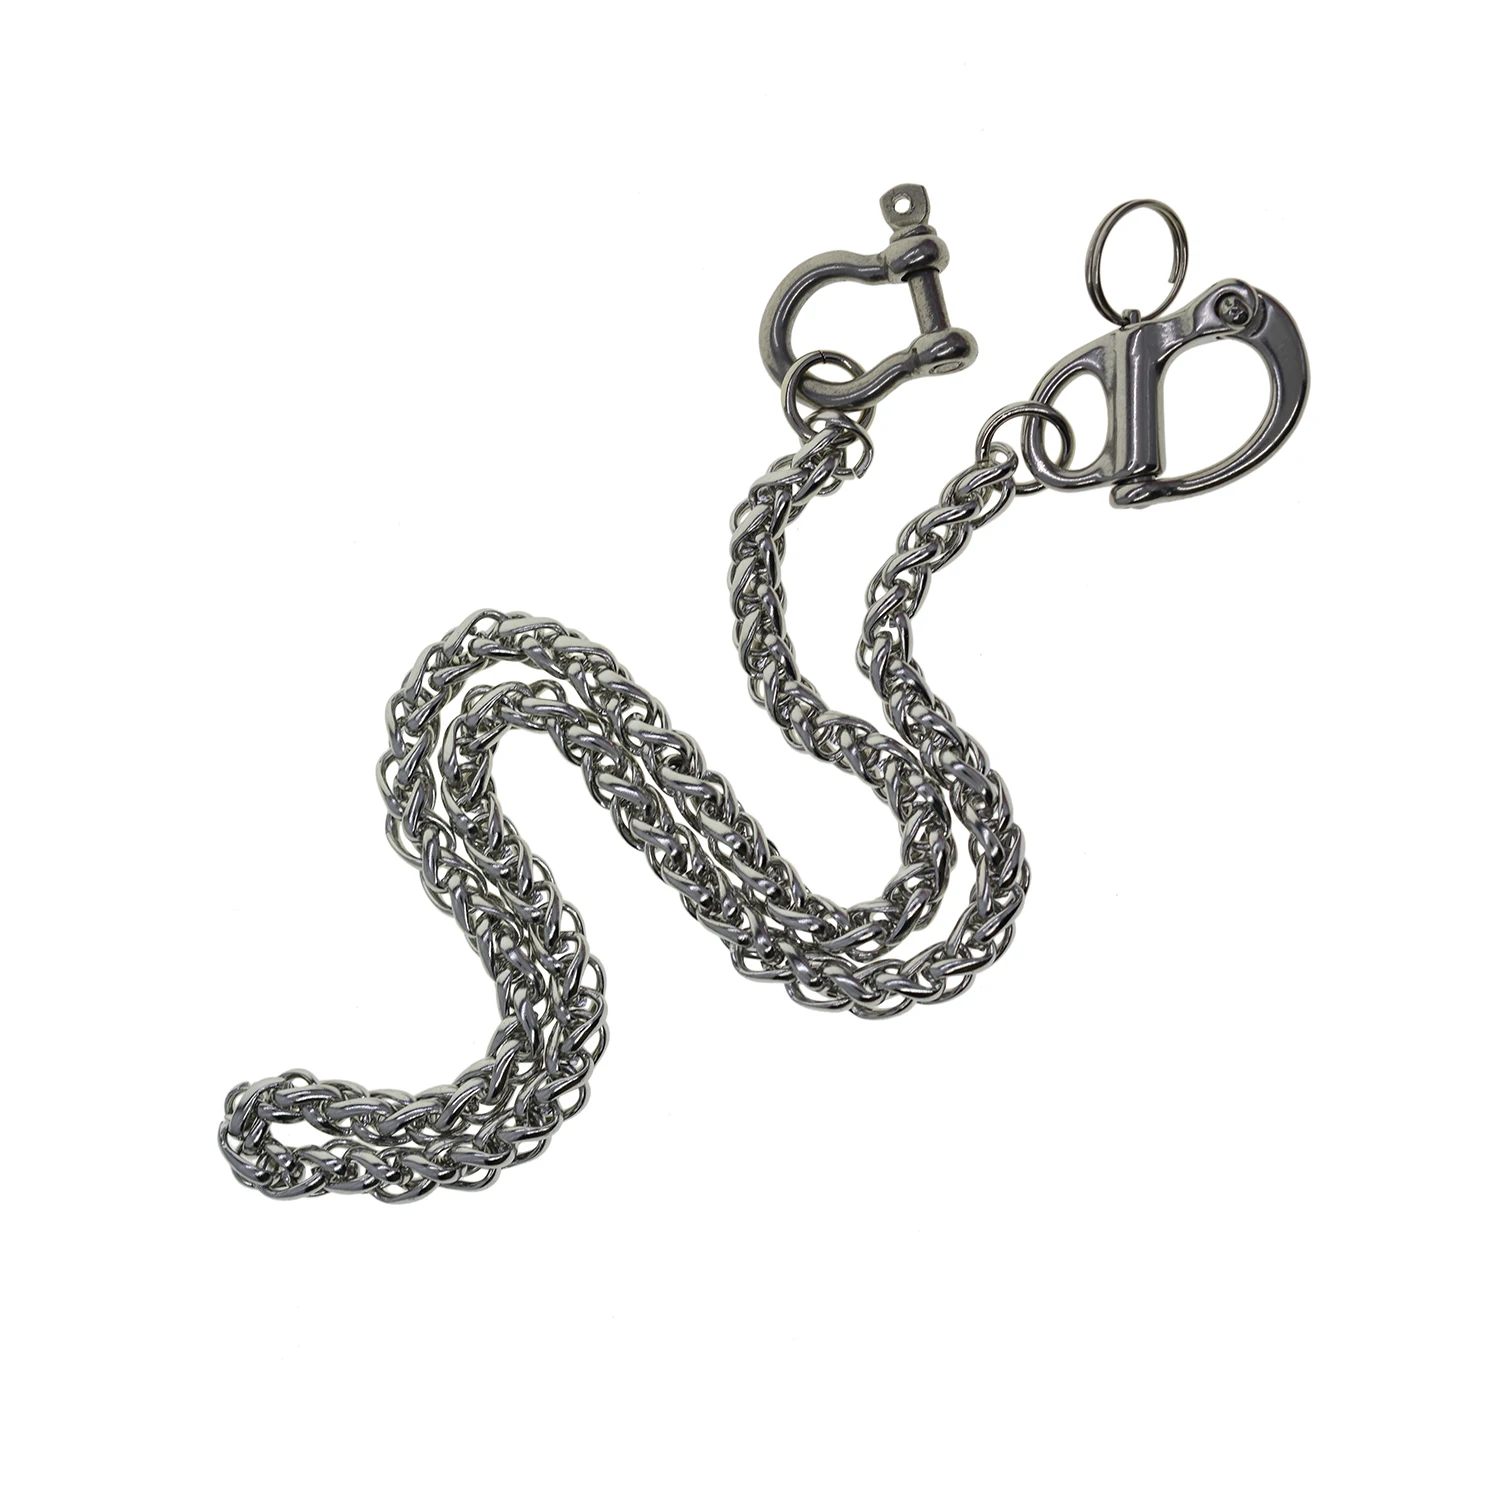 

Stainless steel wheat wallet jean trousers biker chains snake chain D shackle connector sweden nautical carabiner hook keychains